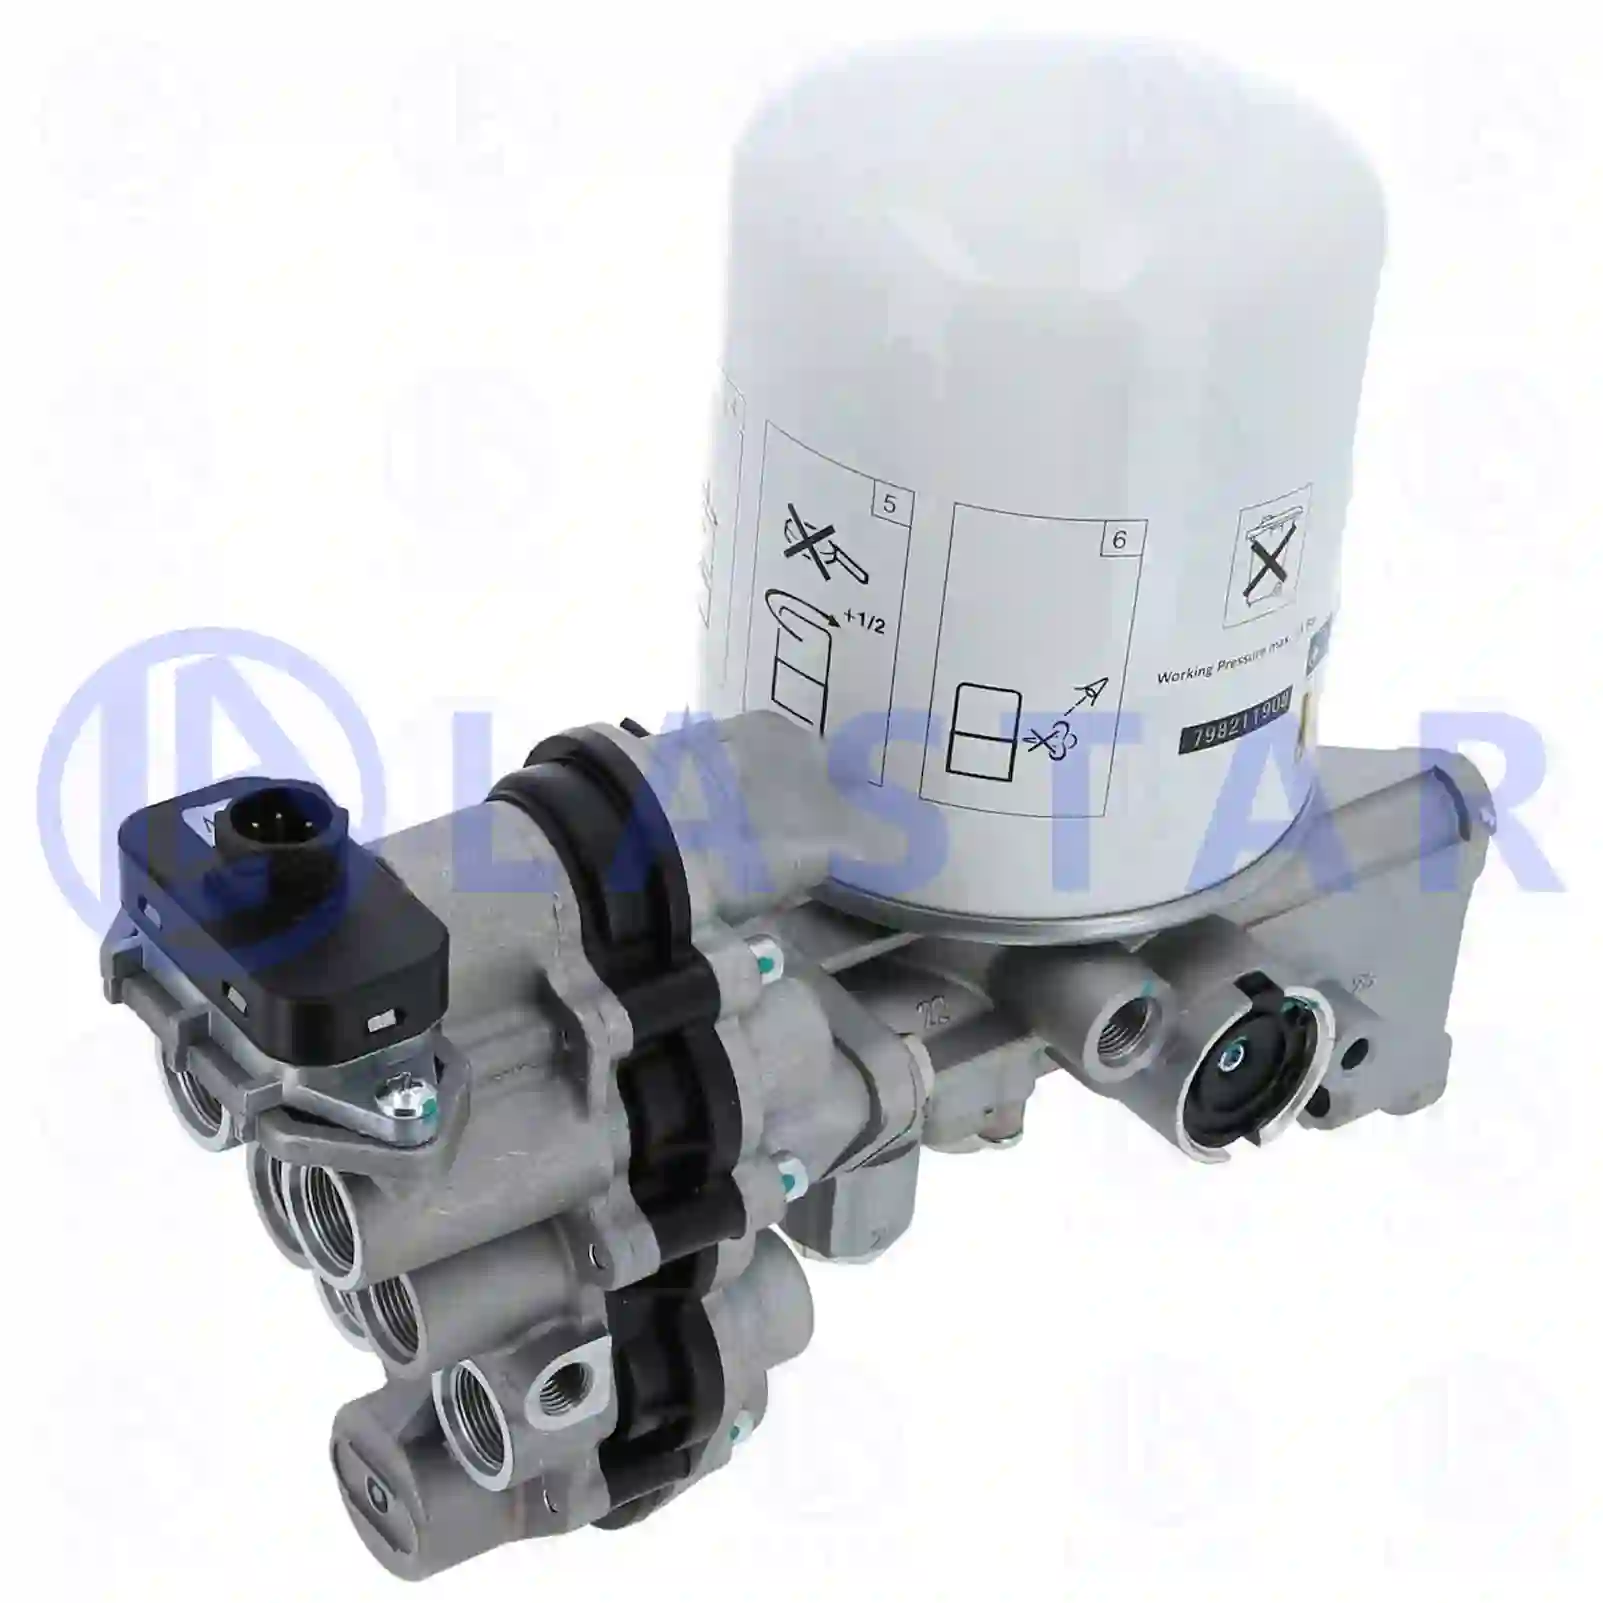 Air dryer, complete with valve, with heating unit, 77715110, 1518170, 0024310515, 0024310715, ZG50056-0008 ||  77715110 Lastar Spare Part | Truck Spare Parts, Auotomotive Spare Parts Air dryer, complete with valve, with heating unit, 77715110, 1518170, 0024310515, 0024310715, ZG50056-0008 ||  77715110 Lastar Spare Part | Truck Spare Parts, Auotomotive Spare Parts